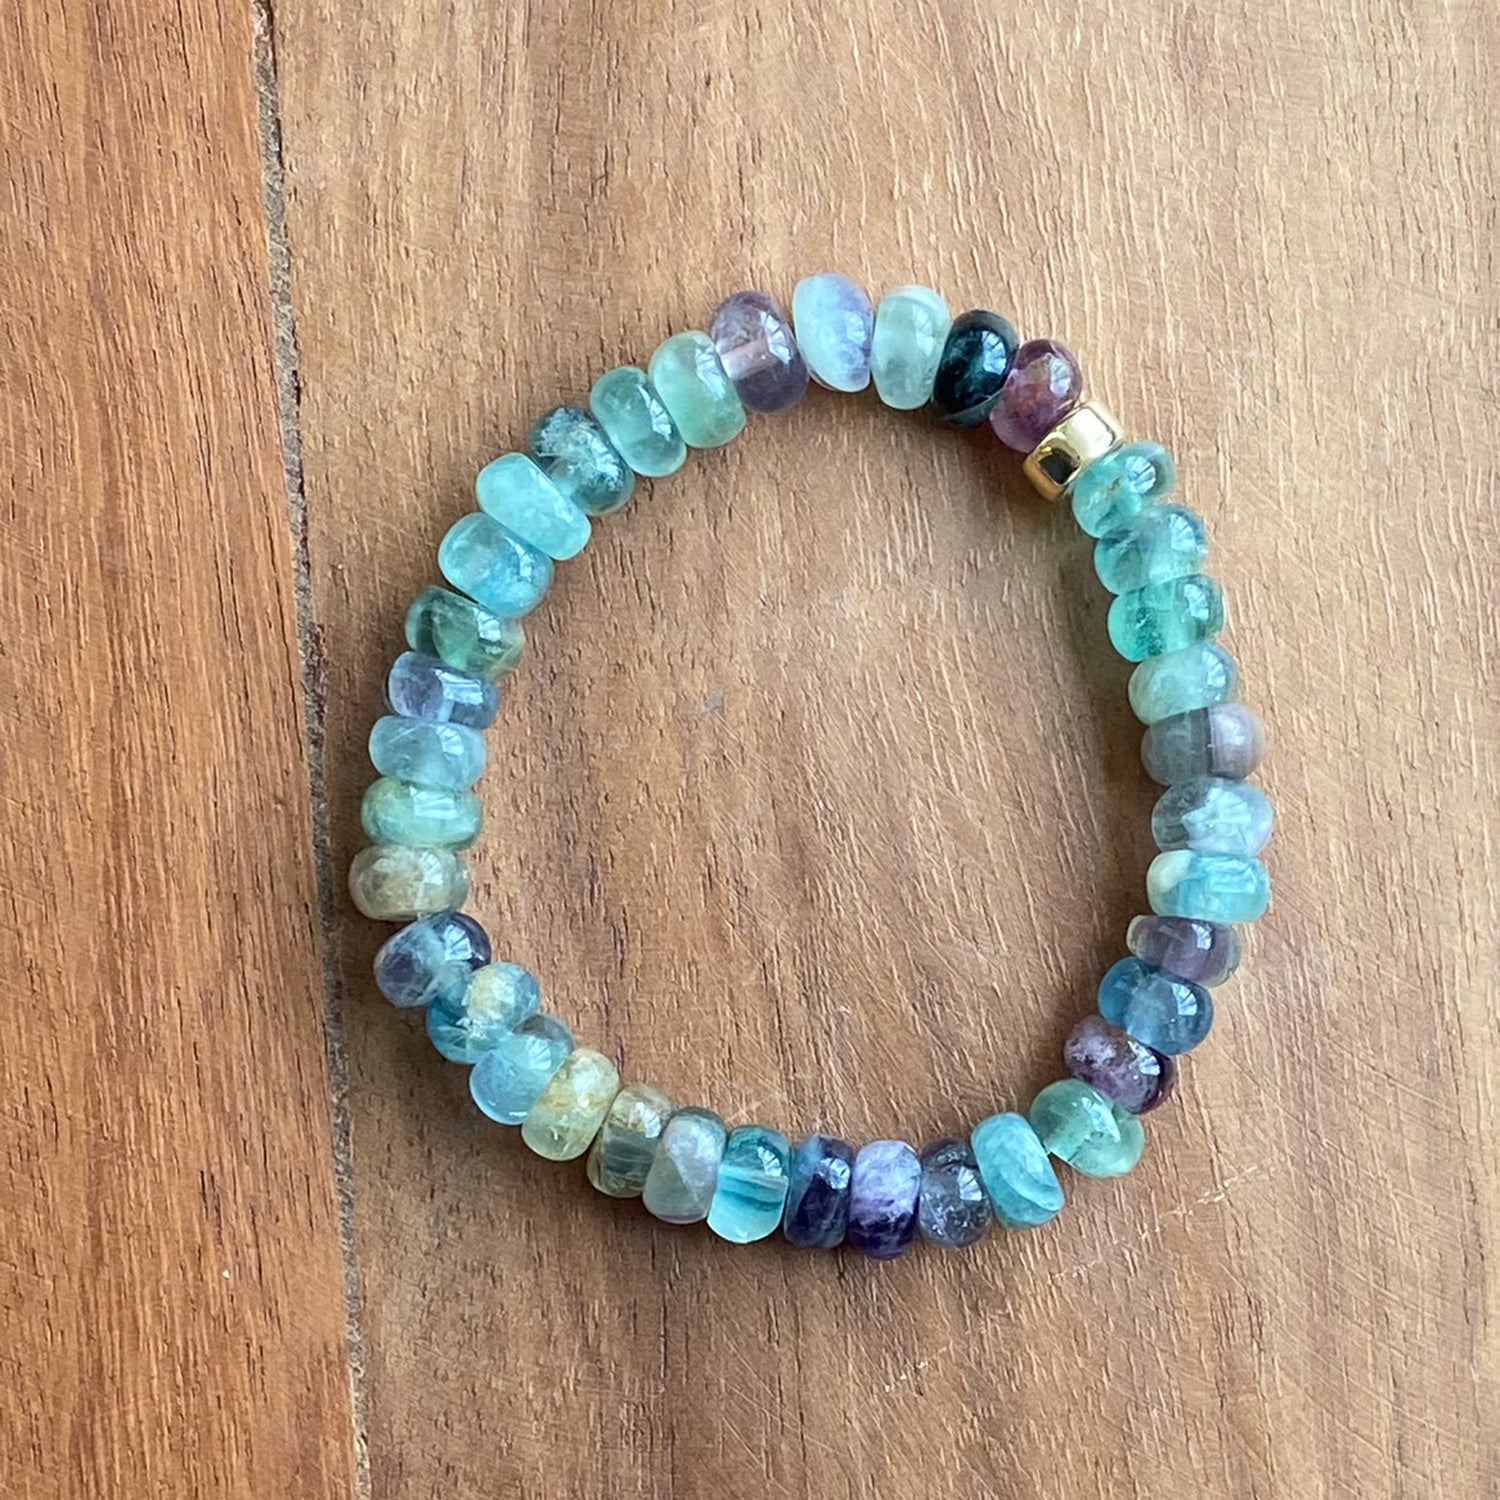 Stone Cache stretch gem stone bracelet in vibrant hues of fluorite blues and purples